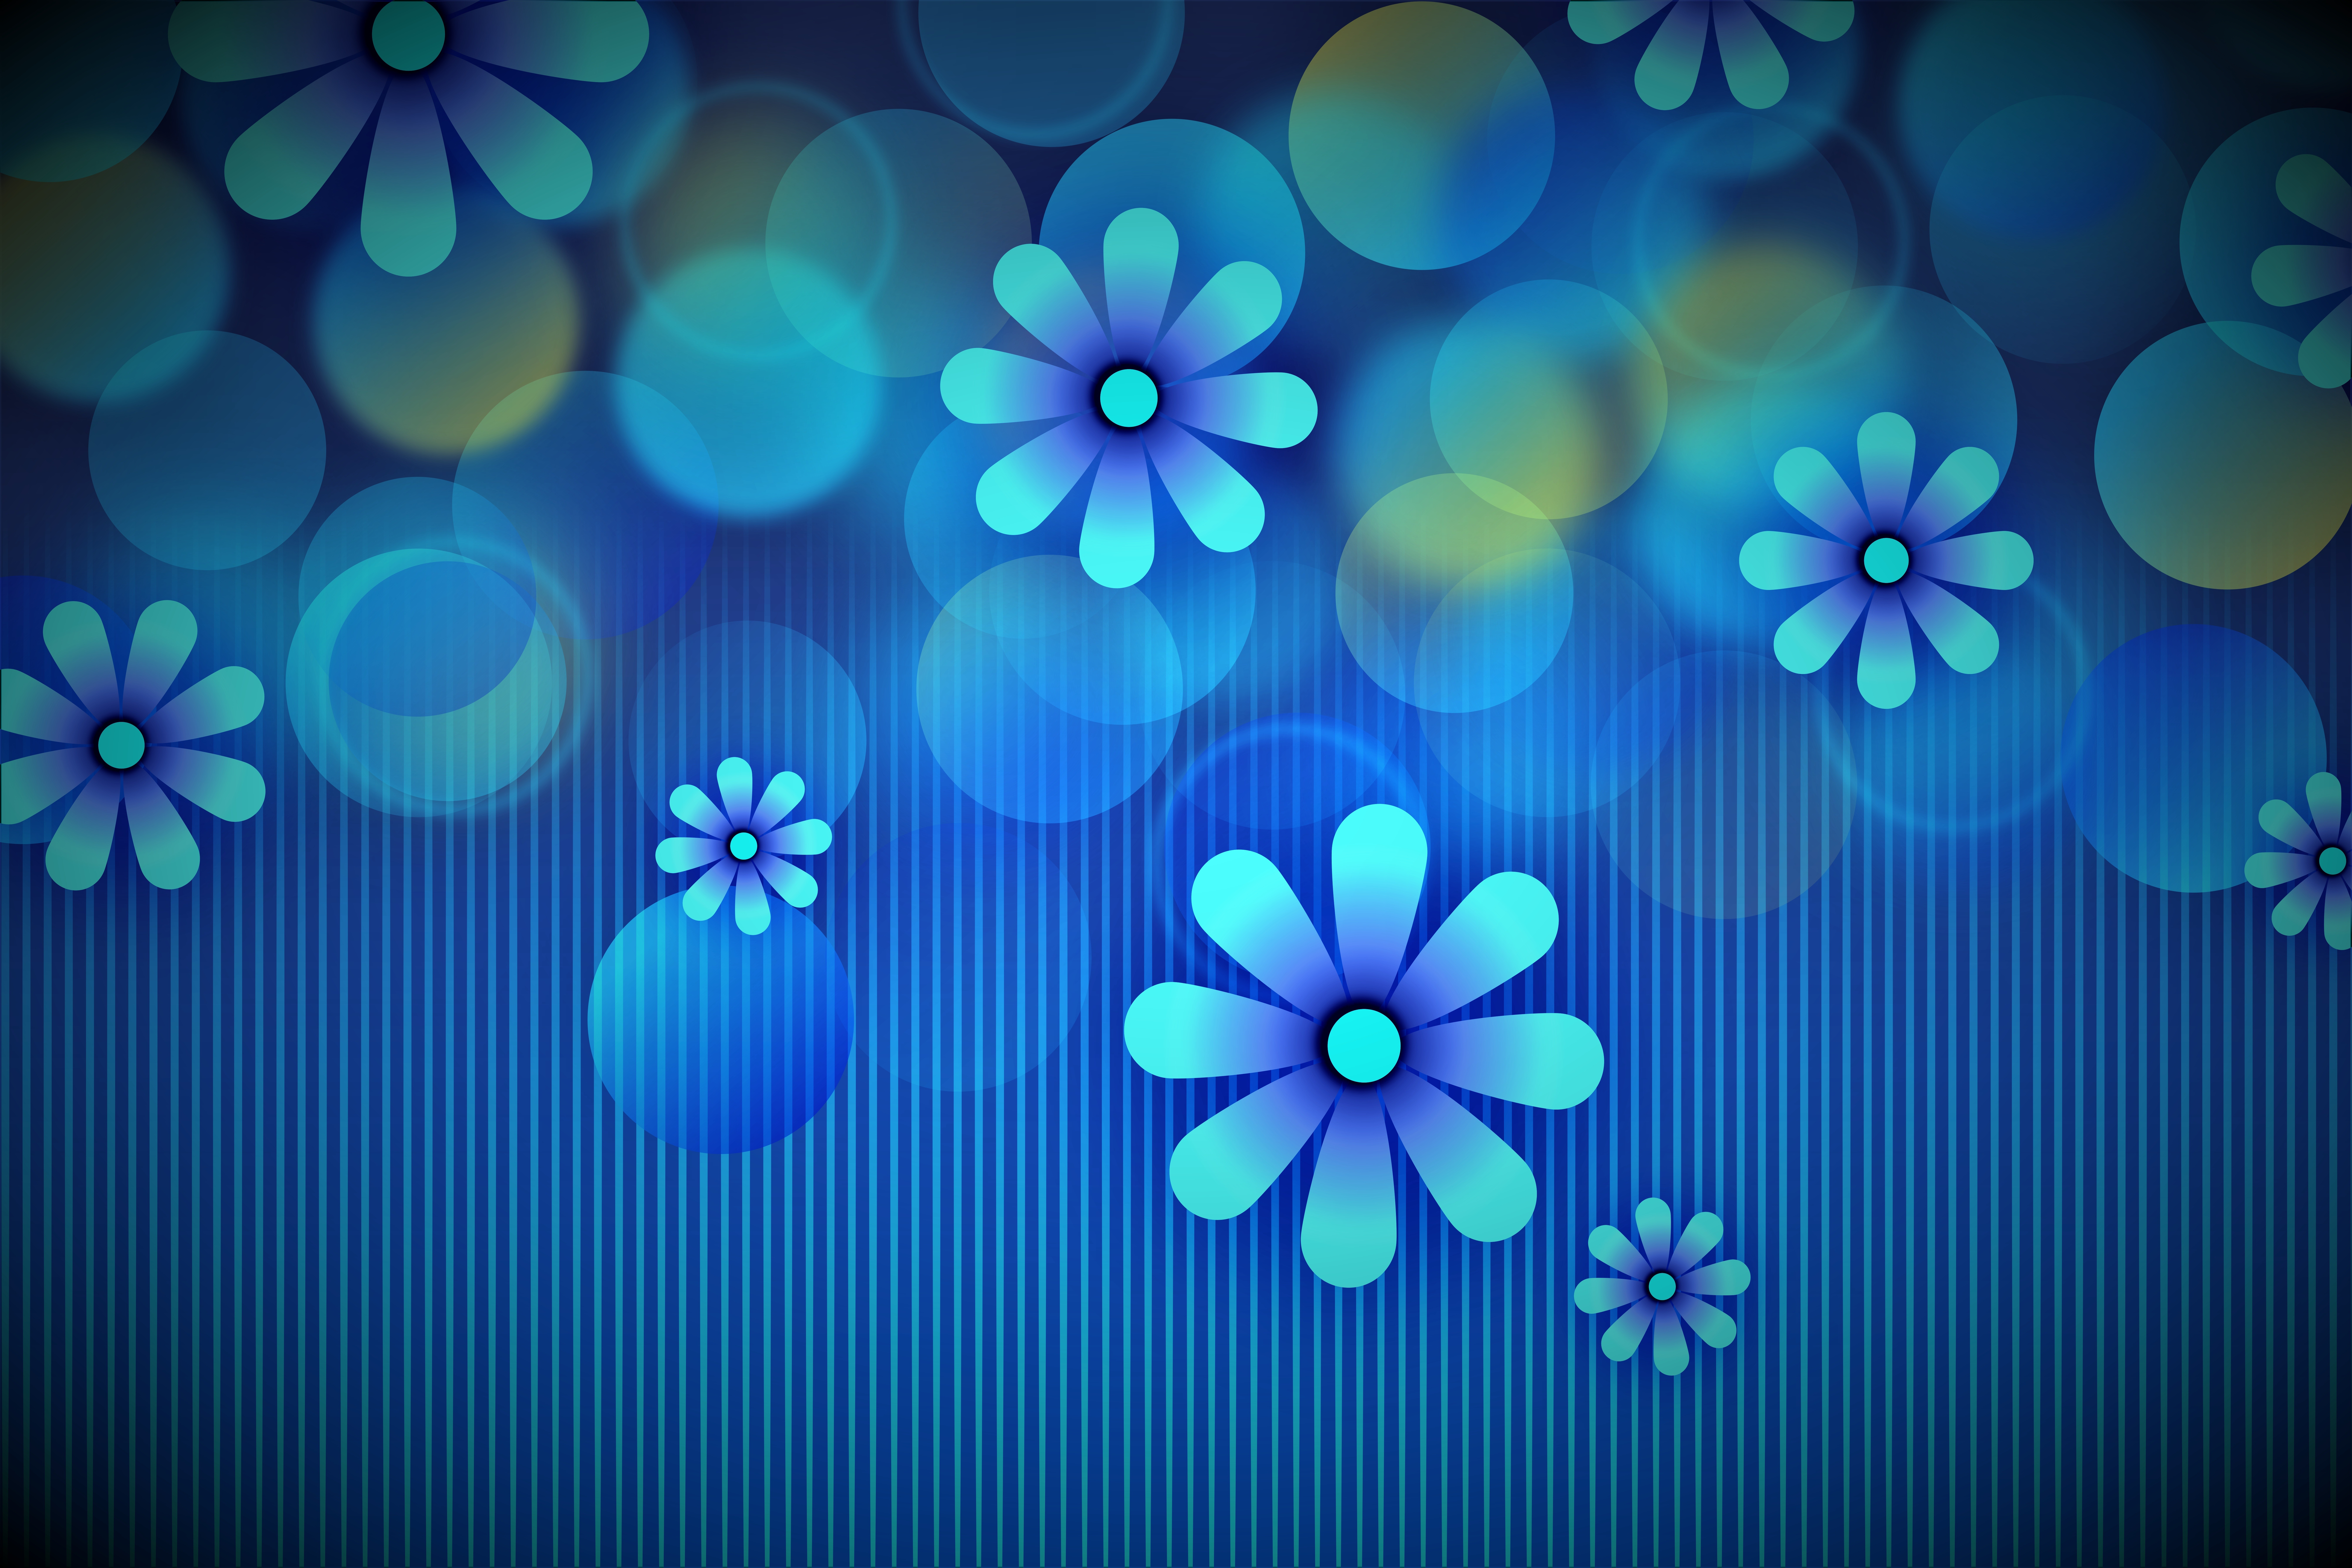 122792 free download Blue wallpapers for phone, pattern, flowers, circles, texture Blue images and screensavers for mobile